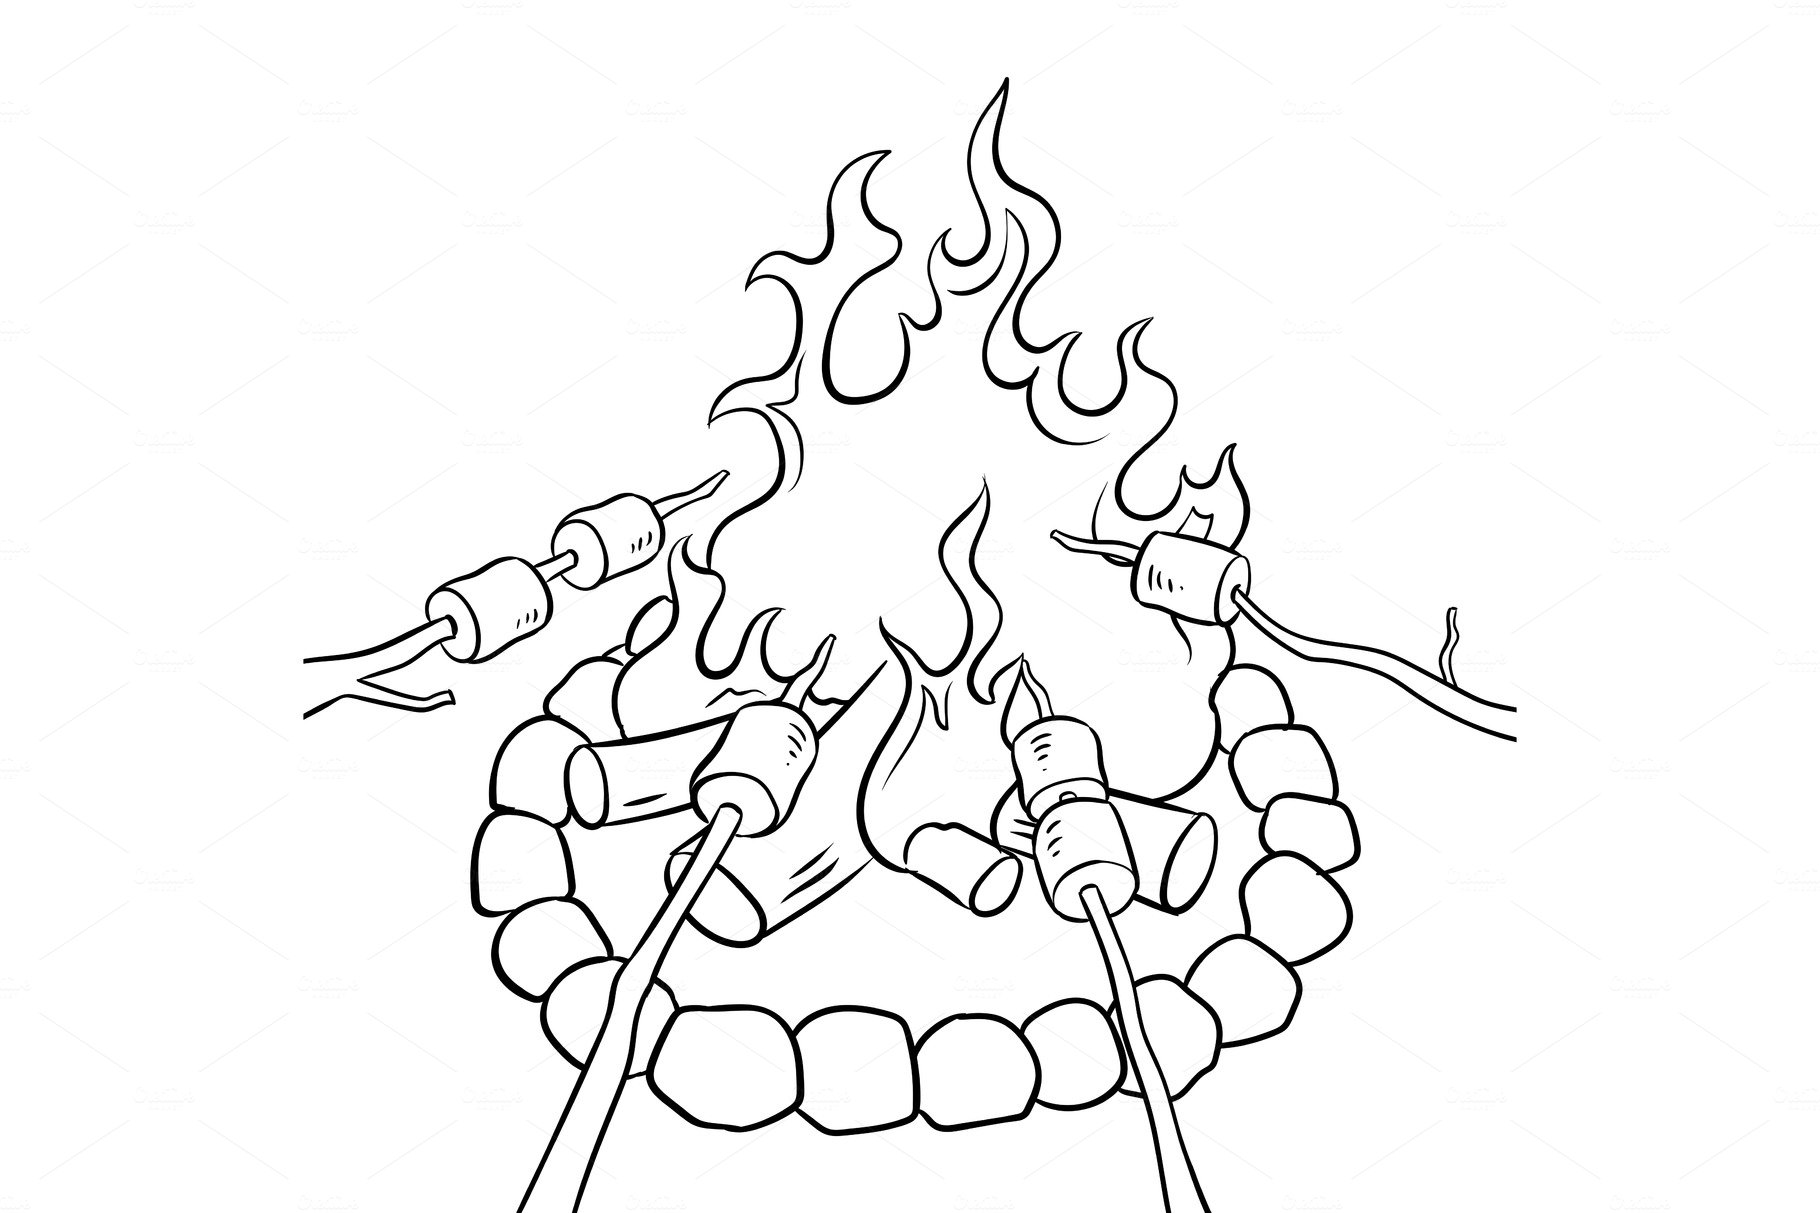 Marshmallow on bonfire coloring book vector cover image.